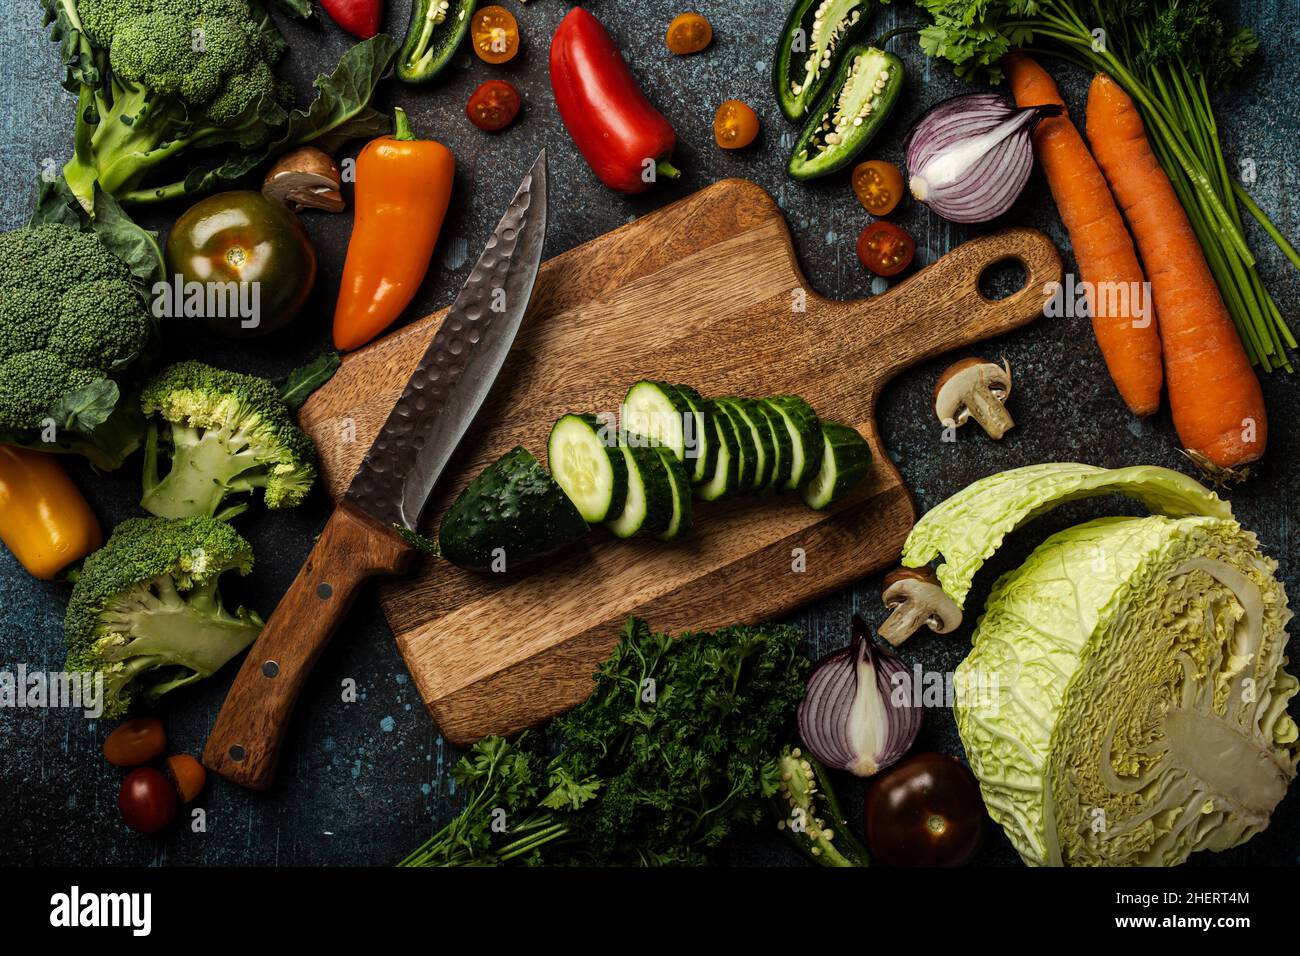 Chopped cucumber on wooden cutting board with knife and assorted fresh vegetables Stock Photo